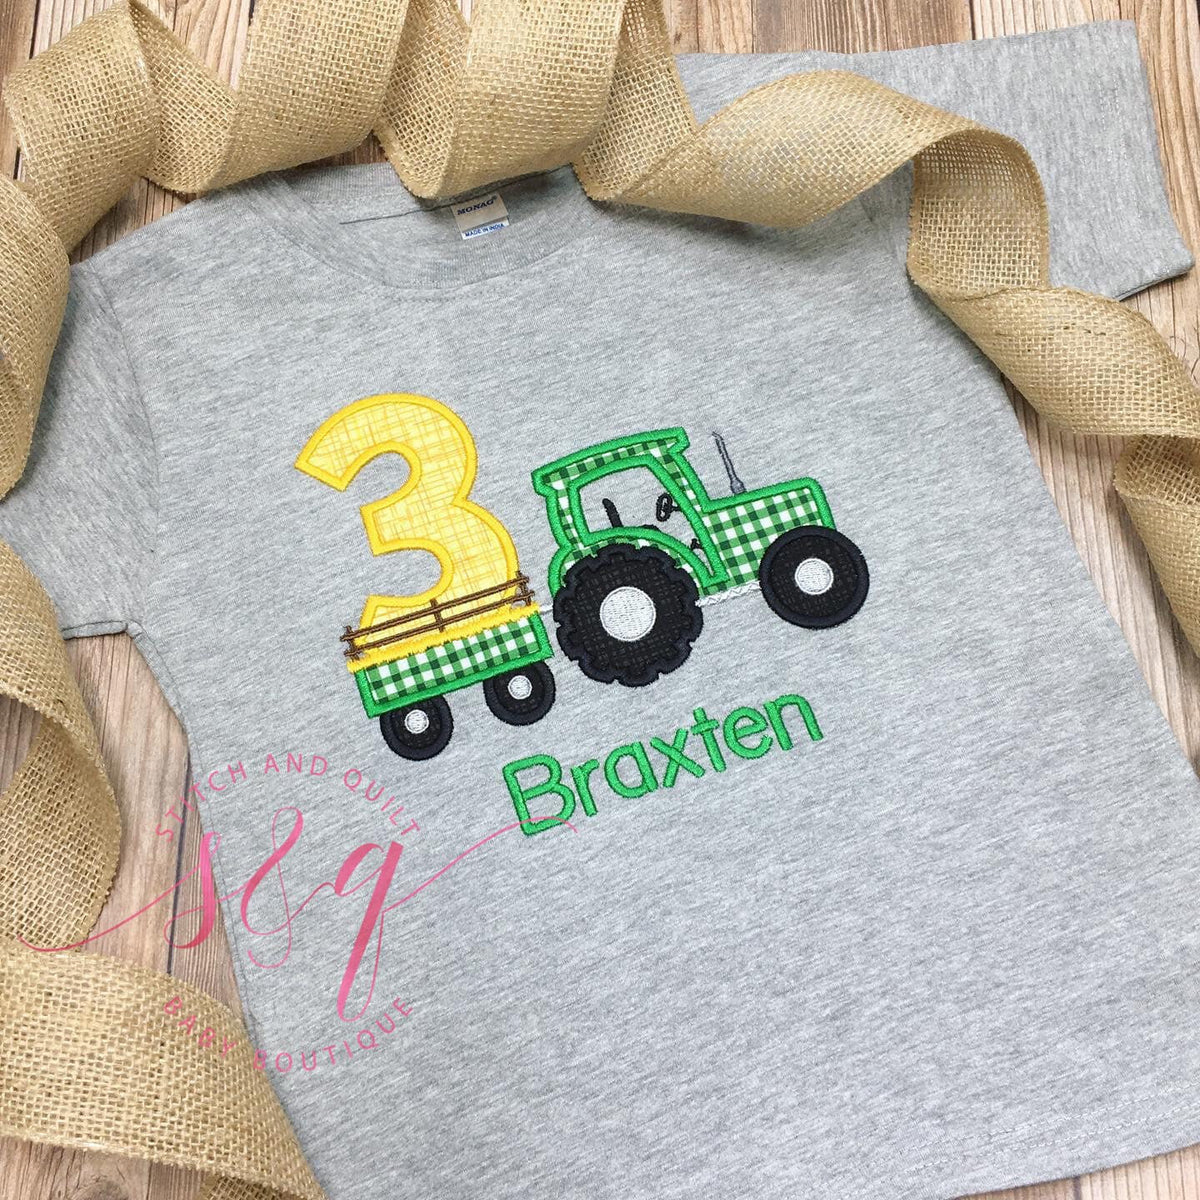 Boys Tractor Shirt, Personalized Tractor Shirt, Tractor Birthday Shirt, Baby boy Tractor Shirt